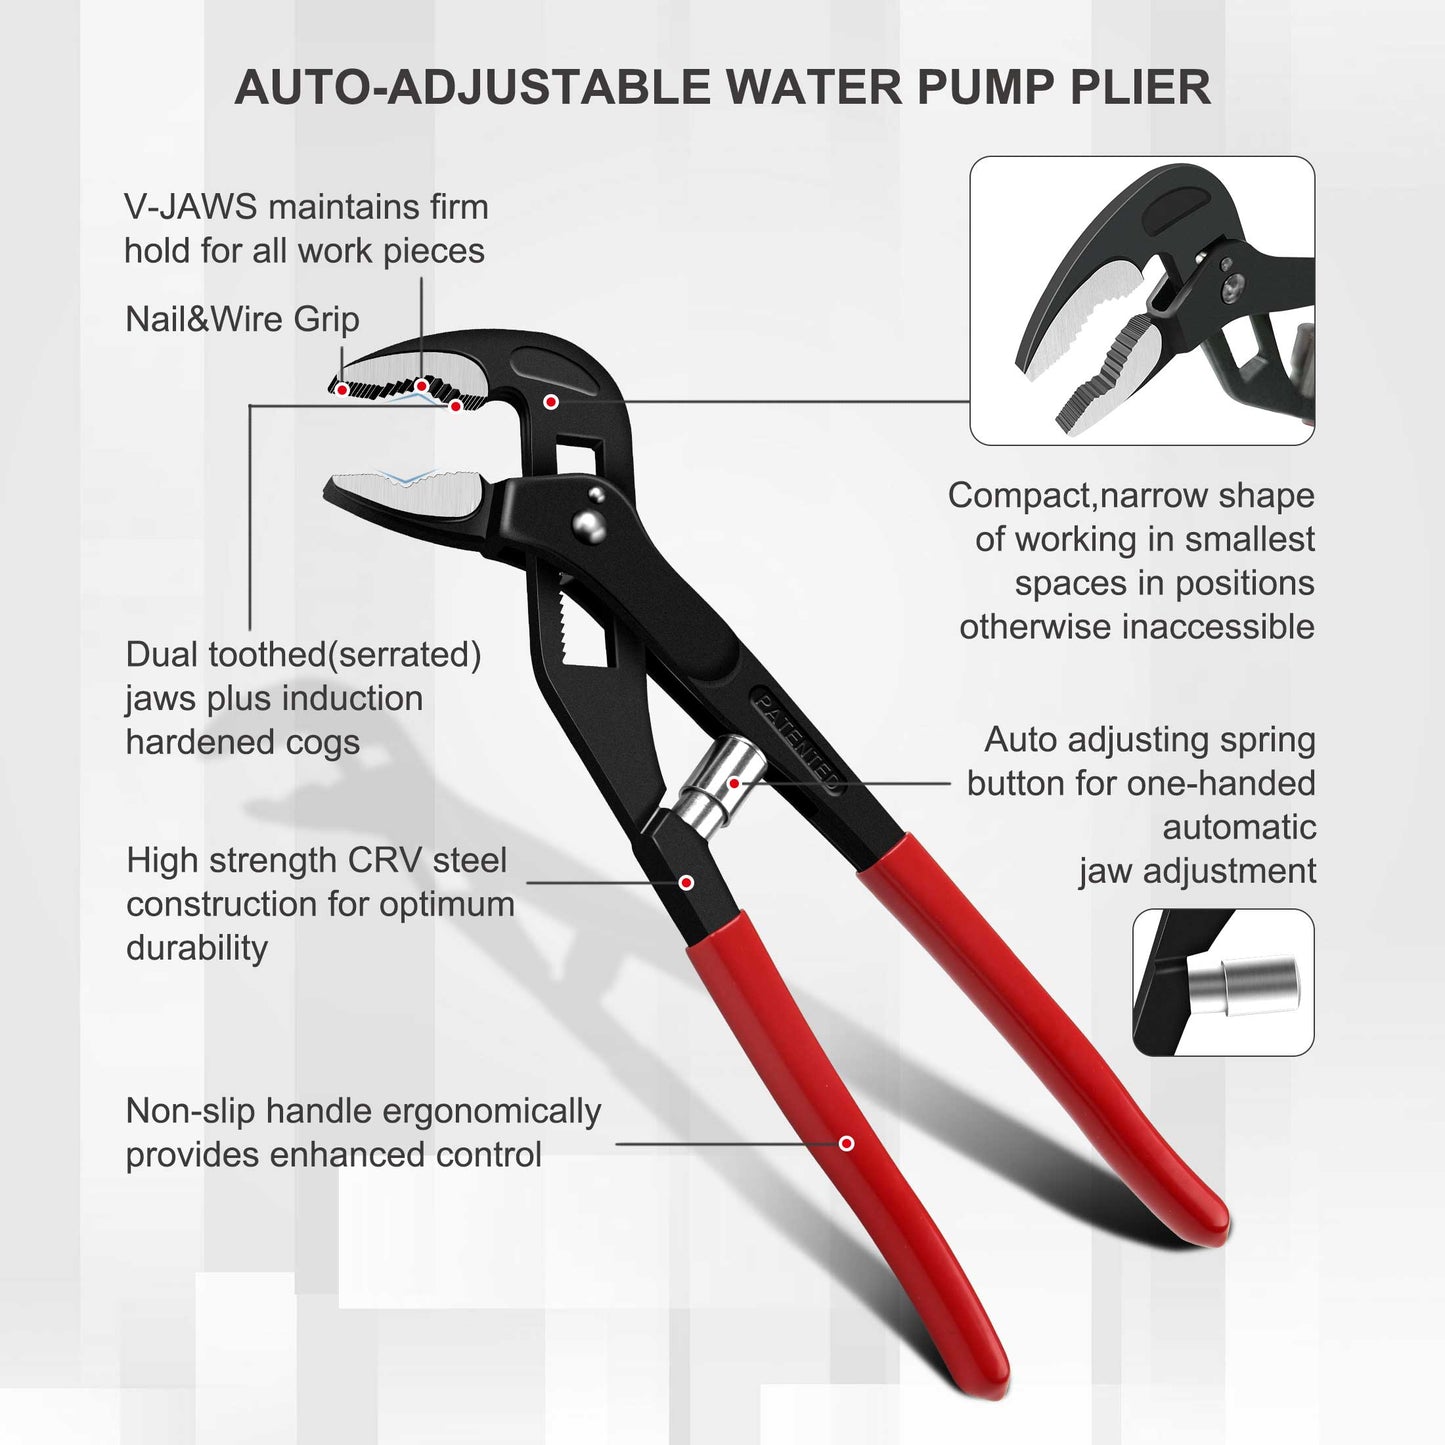 HAUTMEC 10in Quick Adjust Tongue and Groove Joint Pliers, V-Jaw with Comfort Grips, Auto-Adjusting Quick-Action Water pump Pliers On Pipes, Bolts and Nuts HT0088